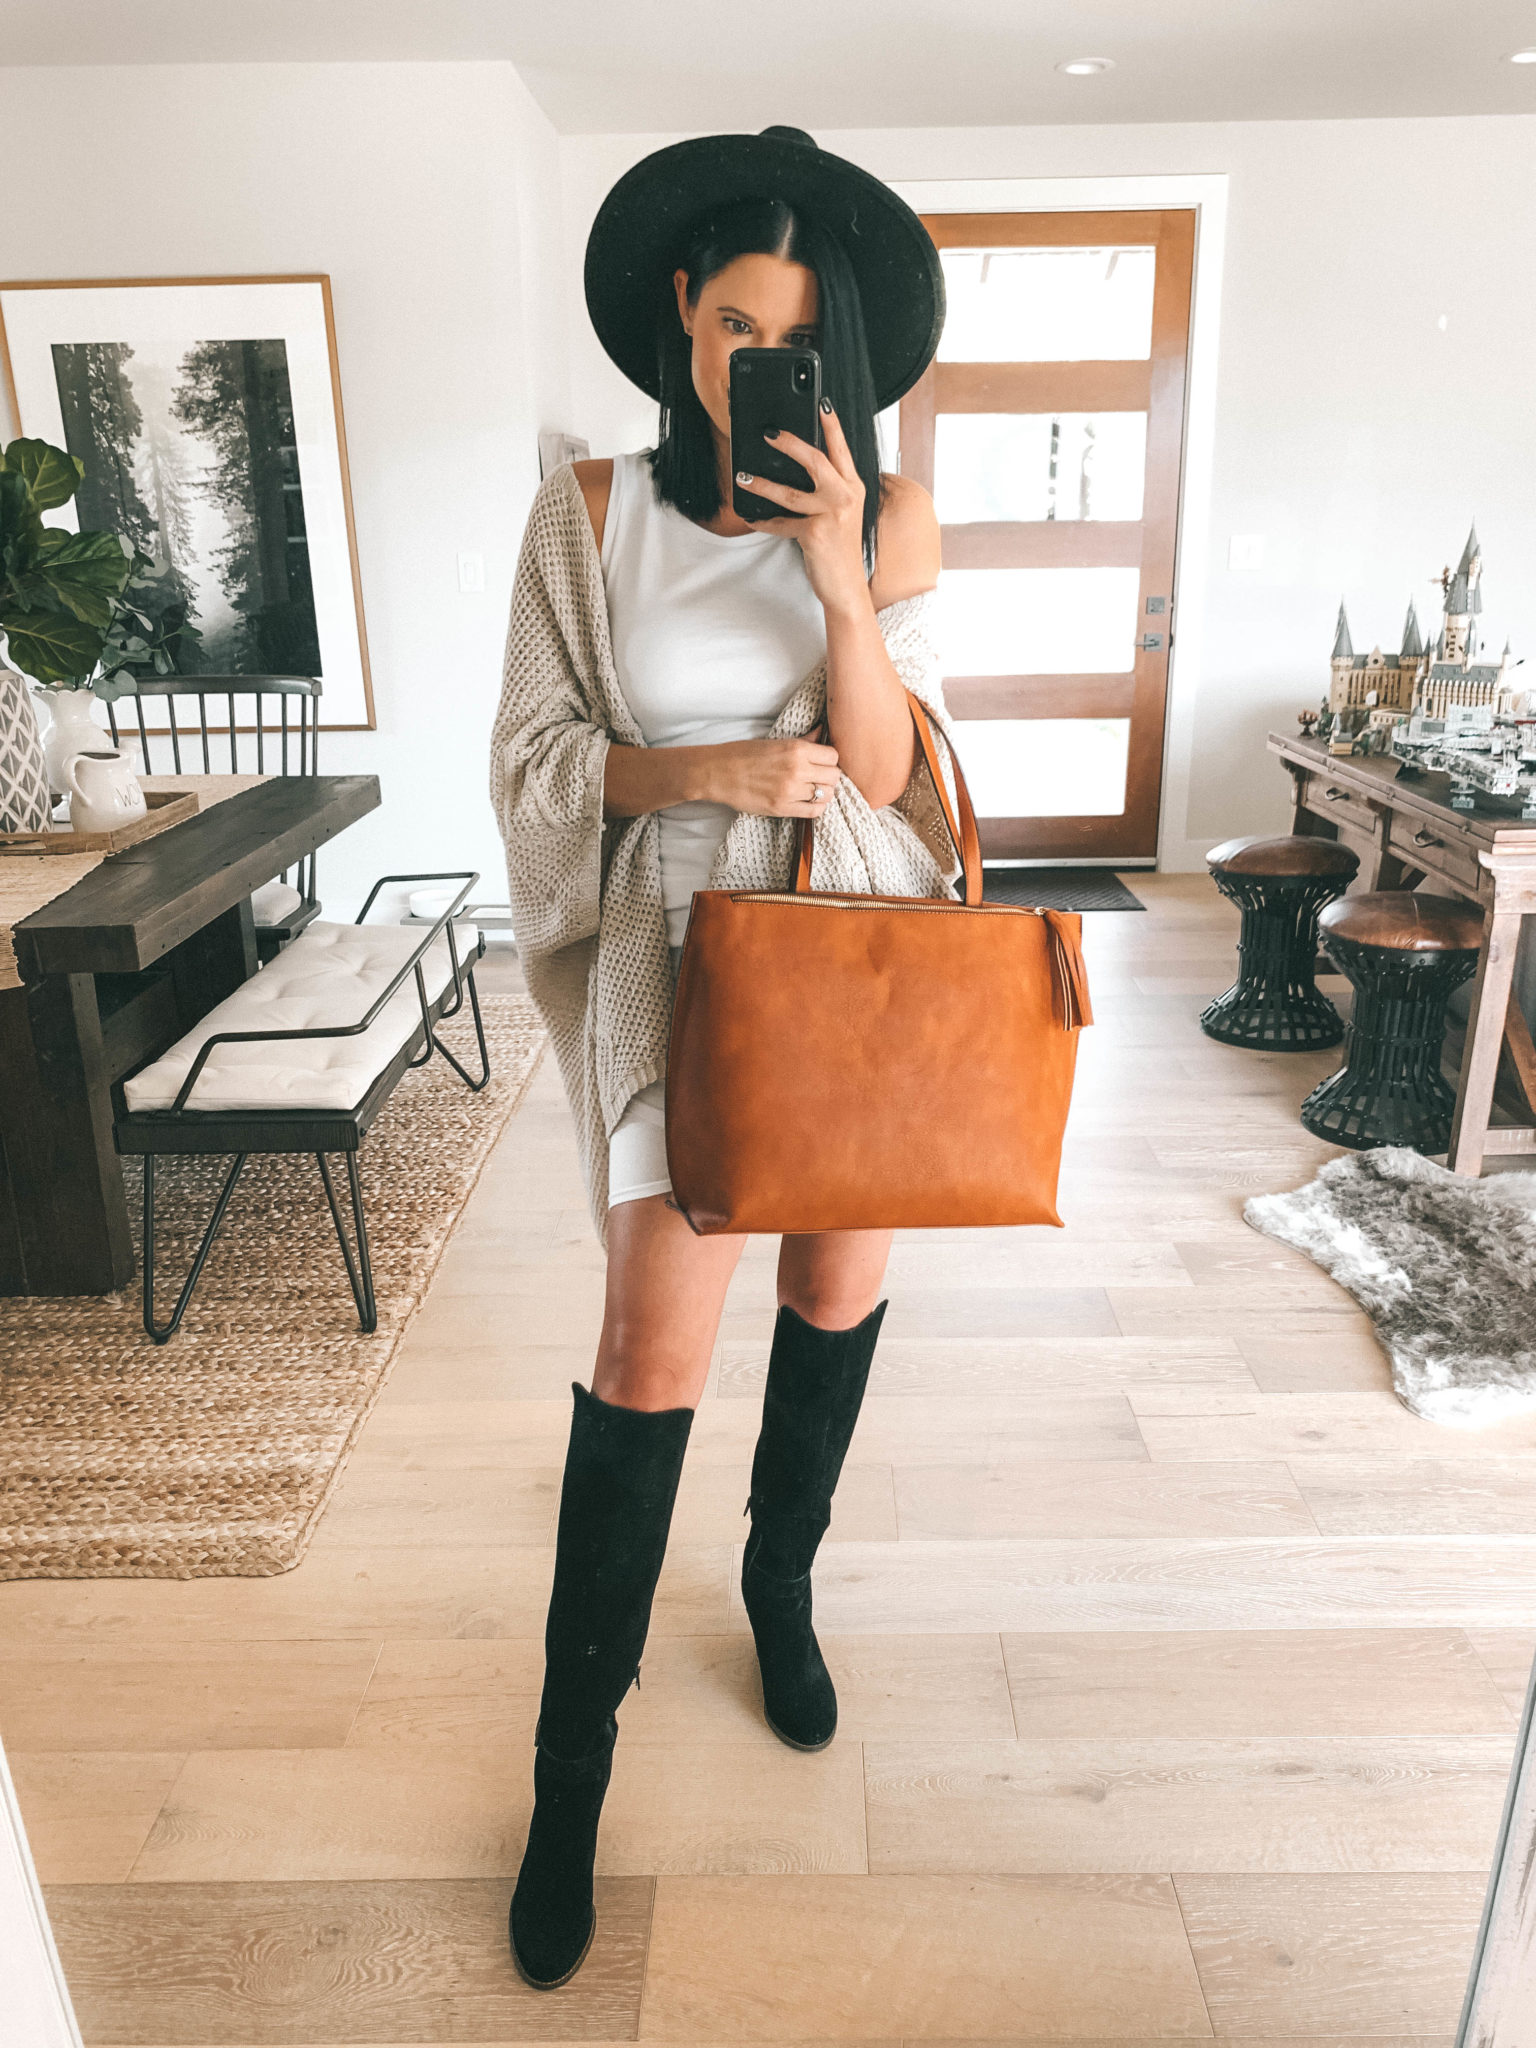 Must Have Sole Society Fall Staples by popular Austin fashion blog, Dressed to Kill: image of a woman wearing a Nordstrom Leith rouched body-con dress, Sole Society Paloma wedge boot, Sole Society Knit Detail Wrap, and holding a Sole Society Wallis Tote. 